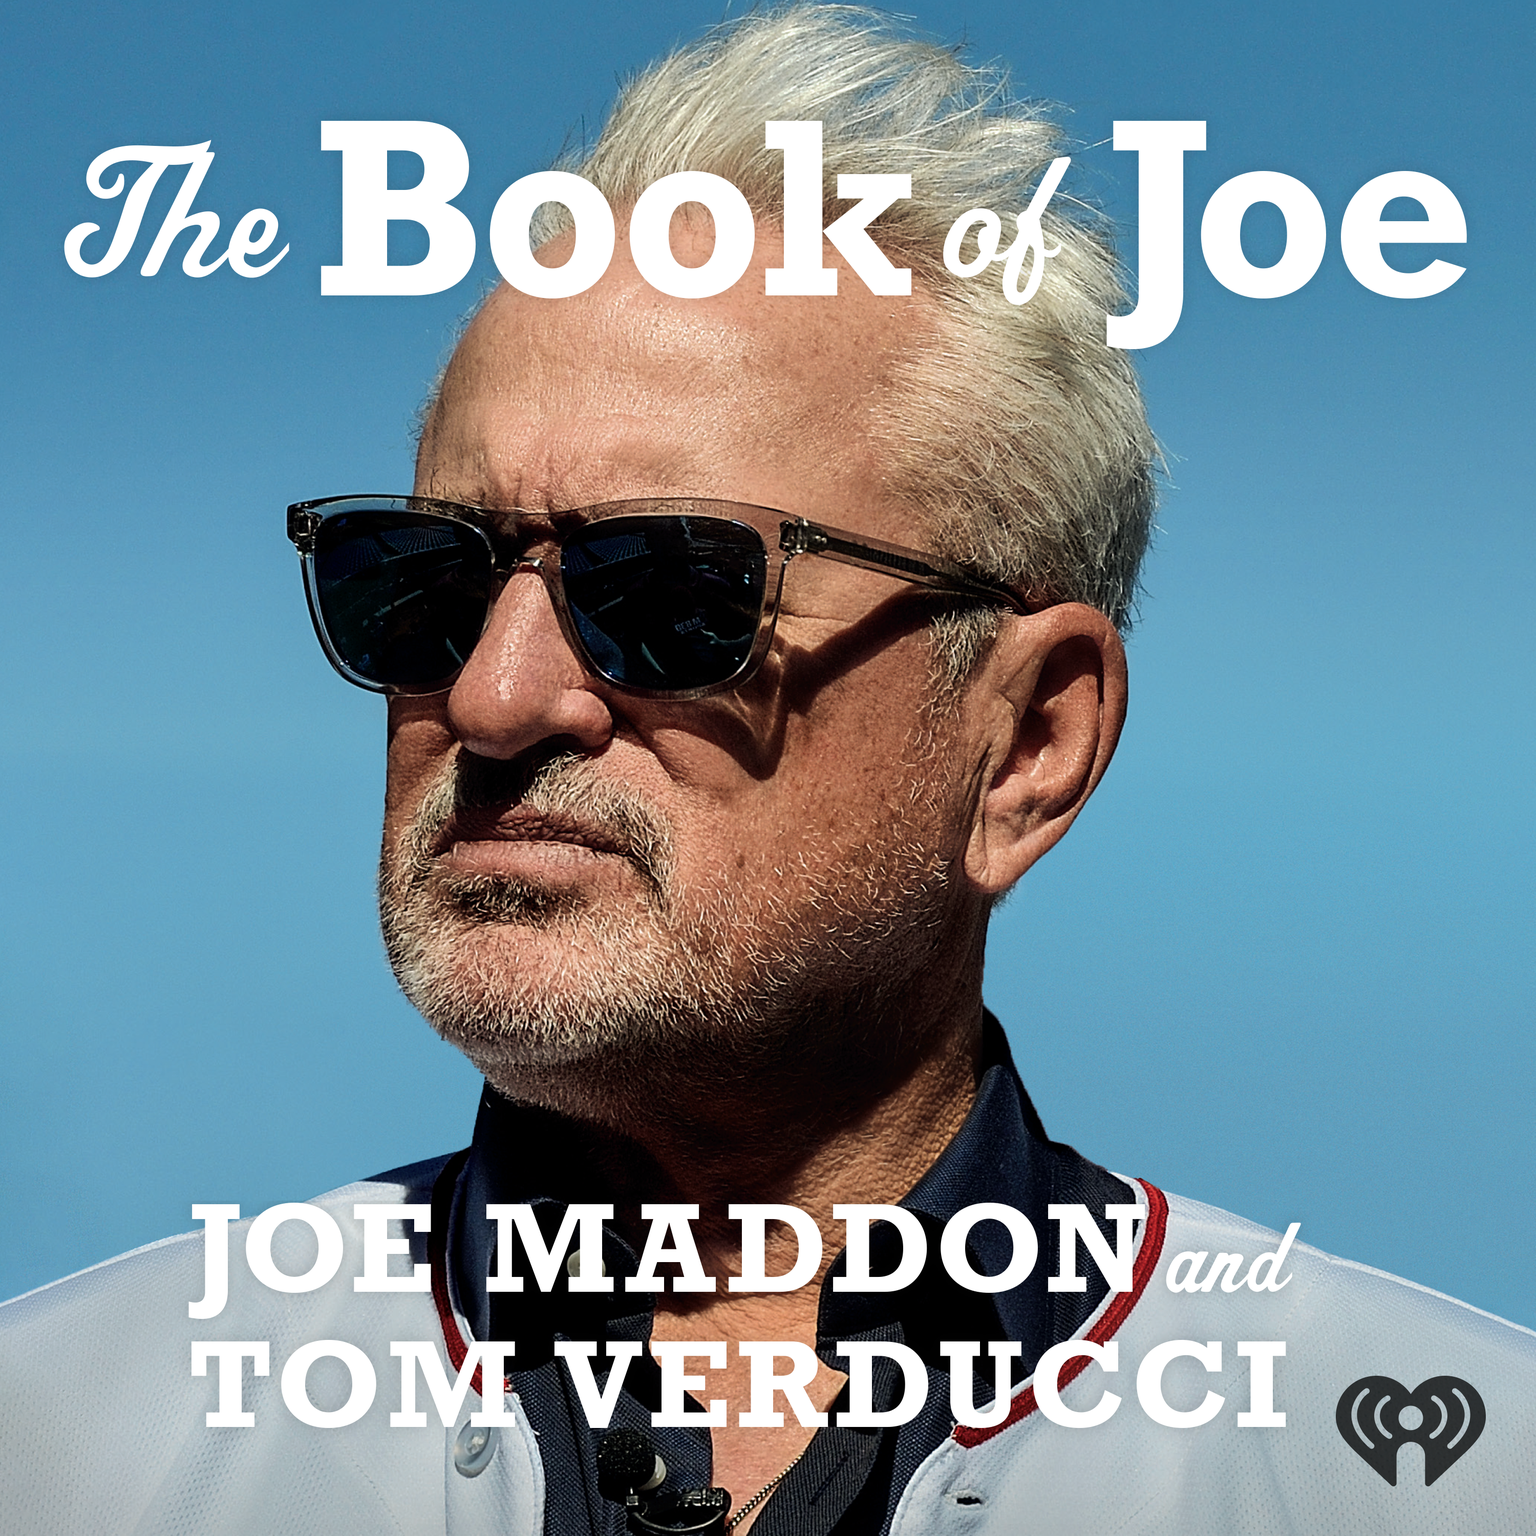 Book of Joe: Phillies win Game 1, Managing moves, Levels of Players, Game 2 Preview, and Guilty pleasure bands